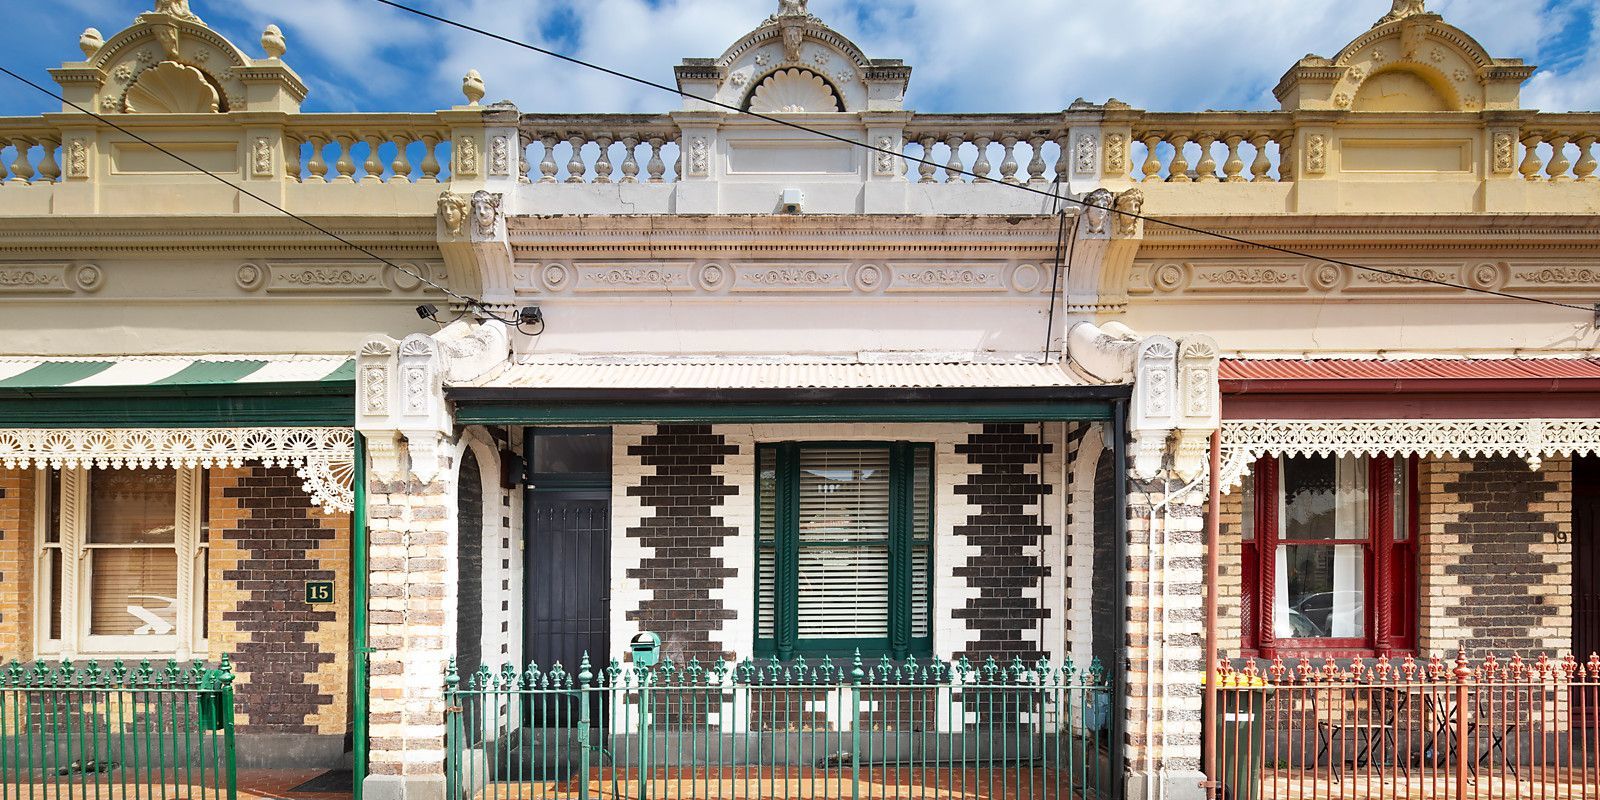 One-bedroom house in Carlton North sells for nearly $1m at auction